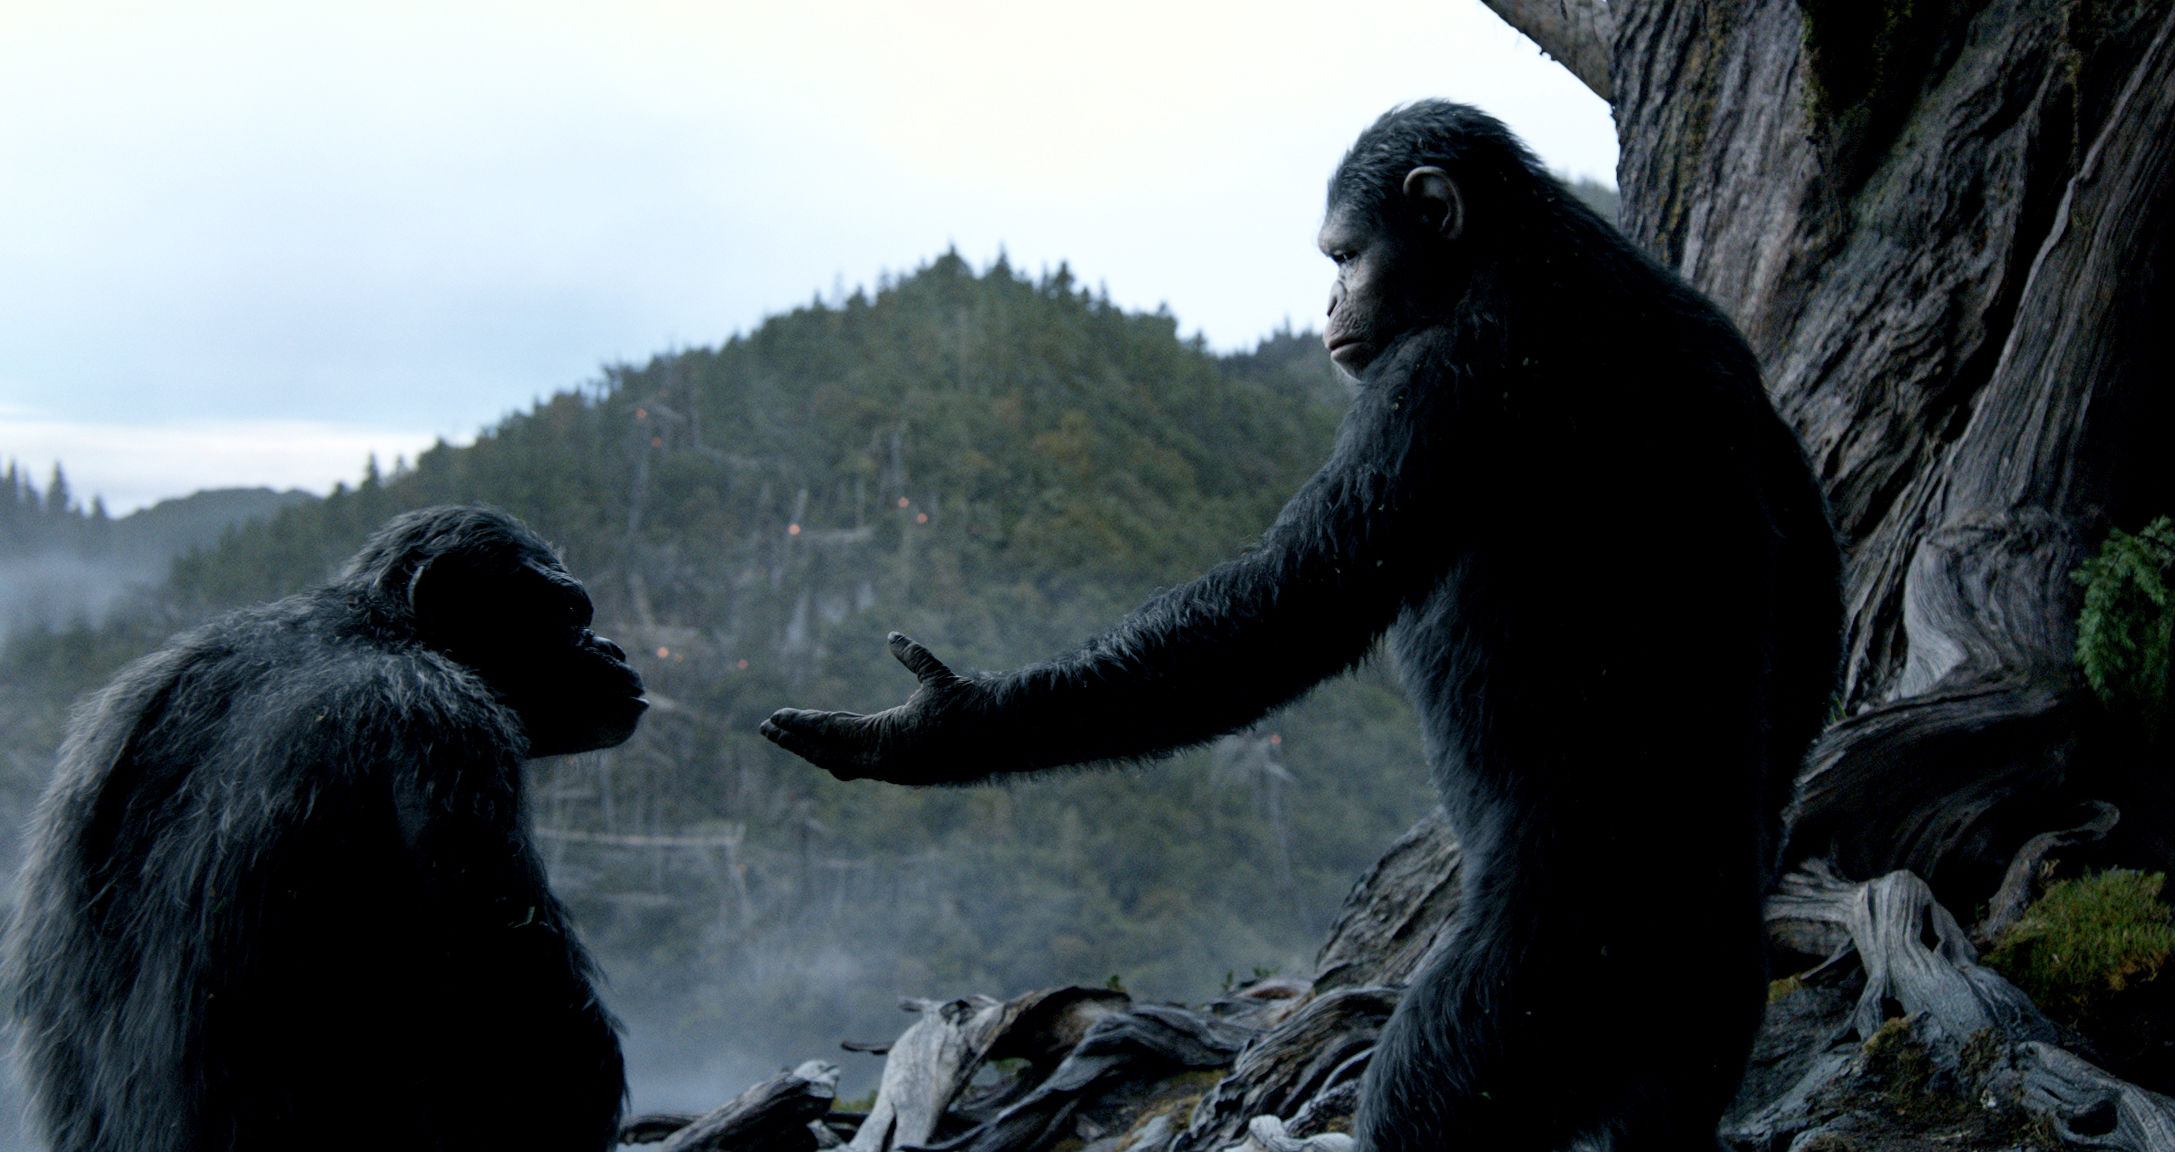 DAWN OF THE PLANET OF THE APES Delivers More than Simple Action and Spectacle